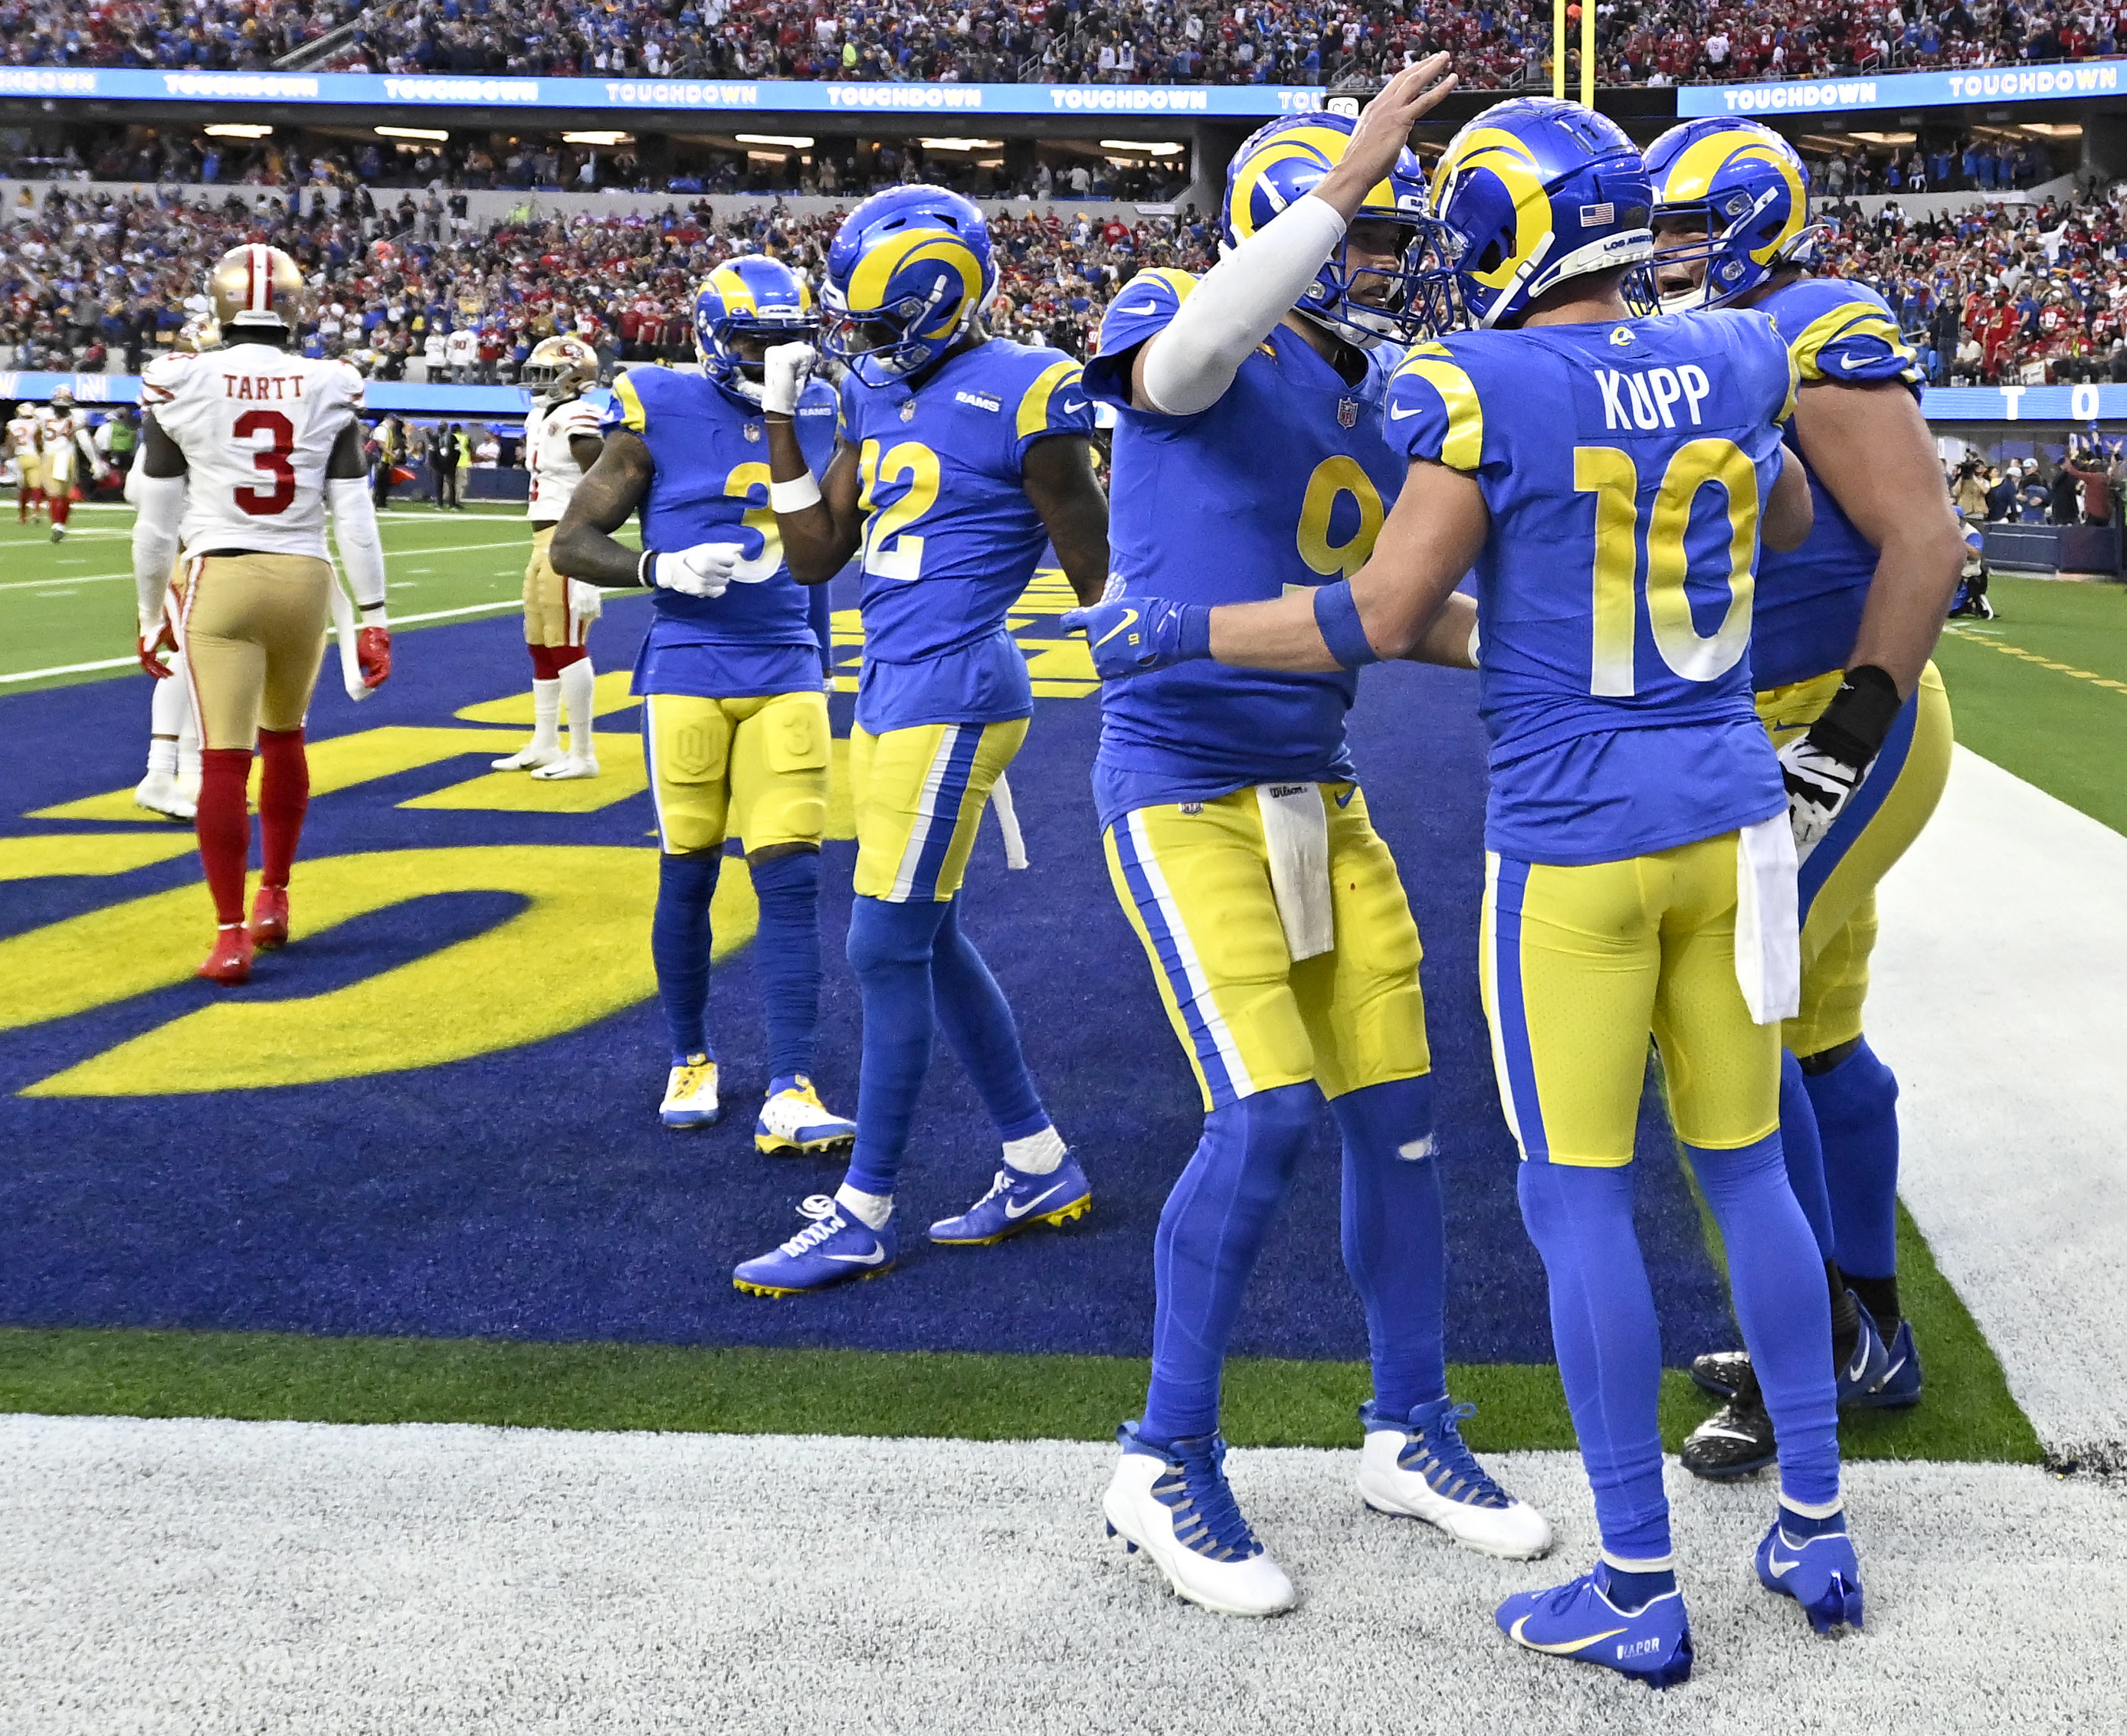 Los Angeles Rams defeat the San Francisco 49ers 20-17 during a NFC championship football game at SoFi Stadium.